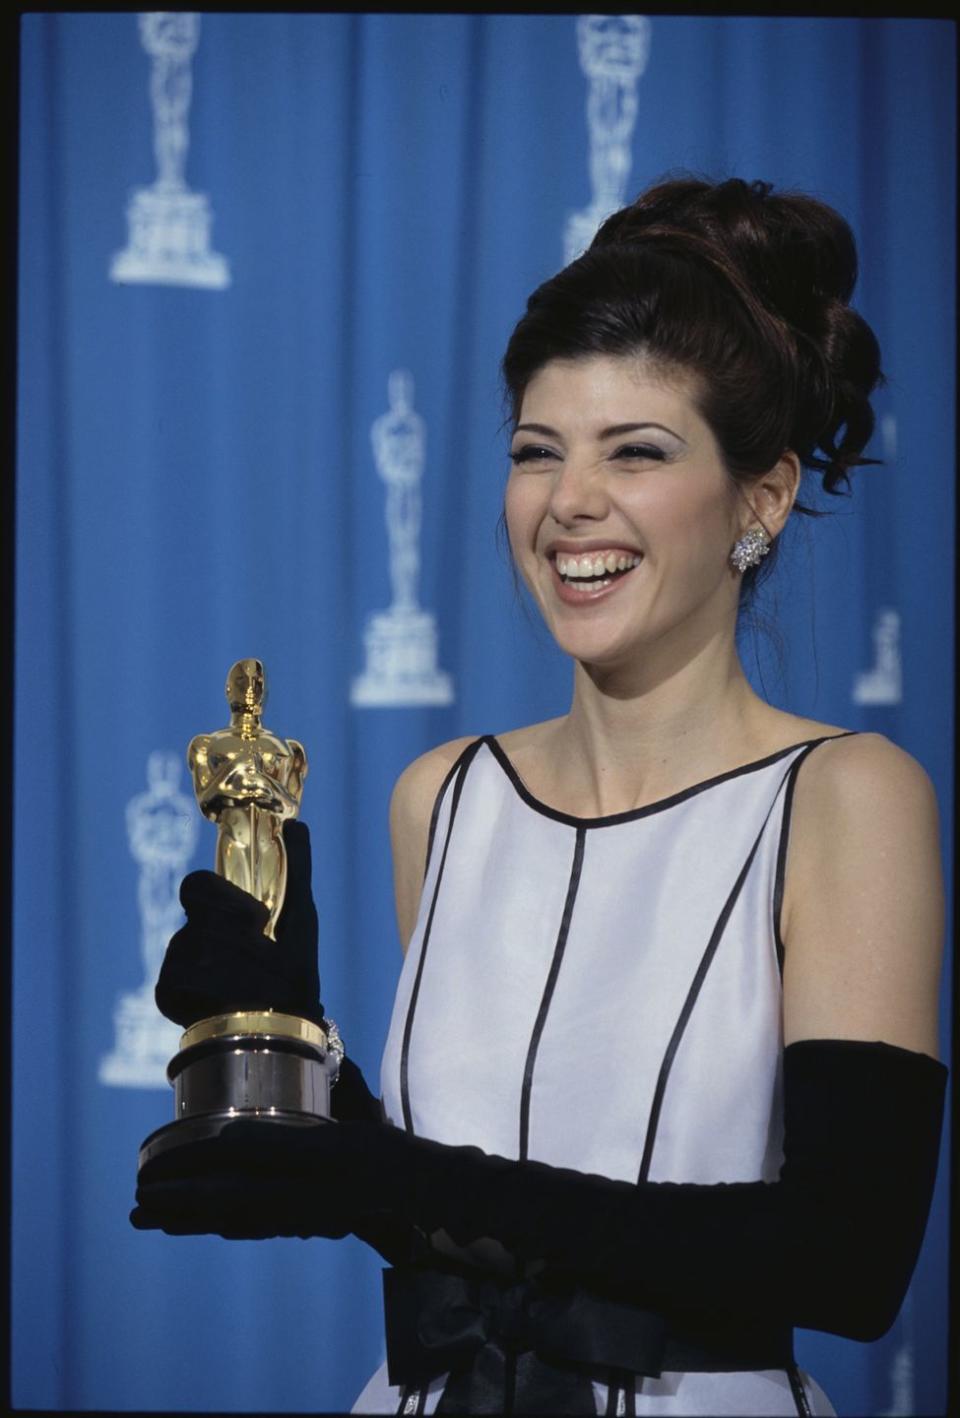 1993: Marisa Tomei wins Best Supporting Actress, but some claim it was a mistake.